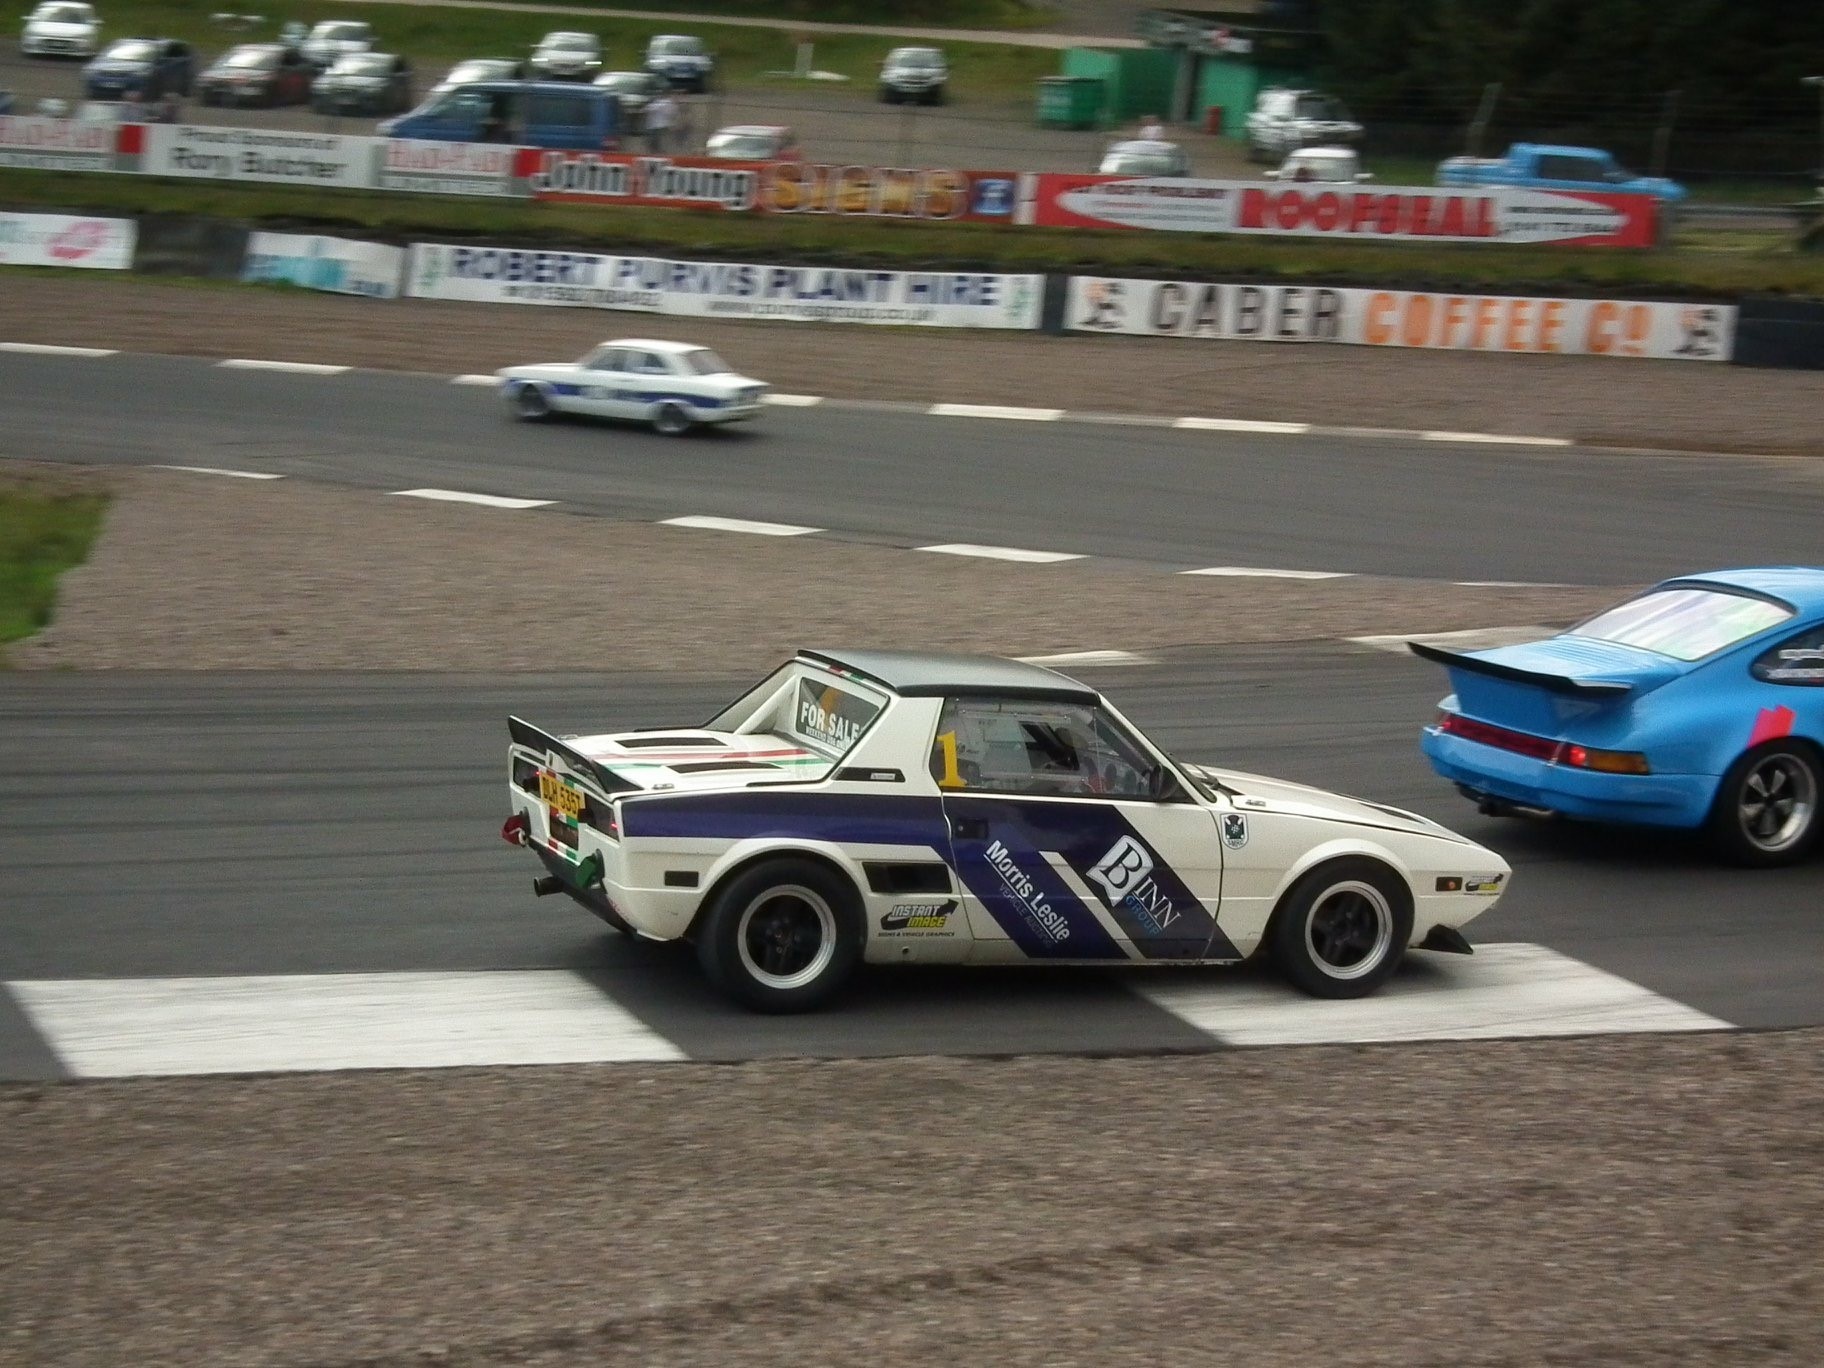 Alastair Baptie in action in his classic Fiat.